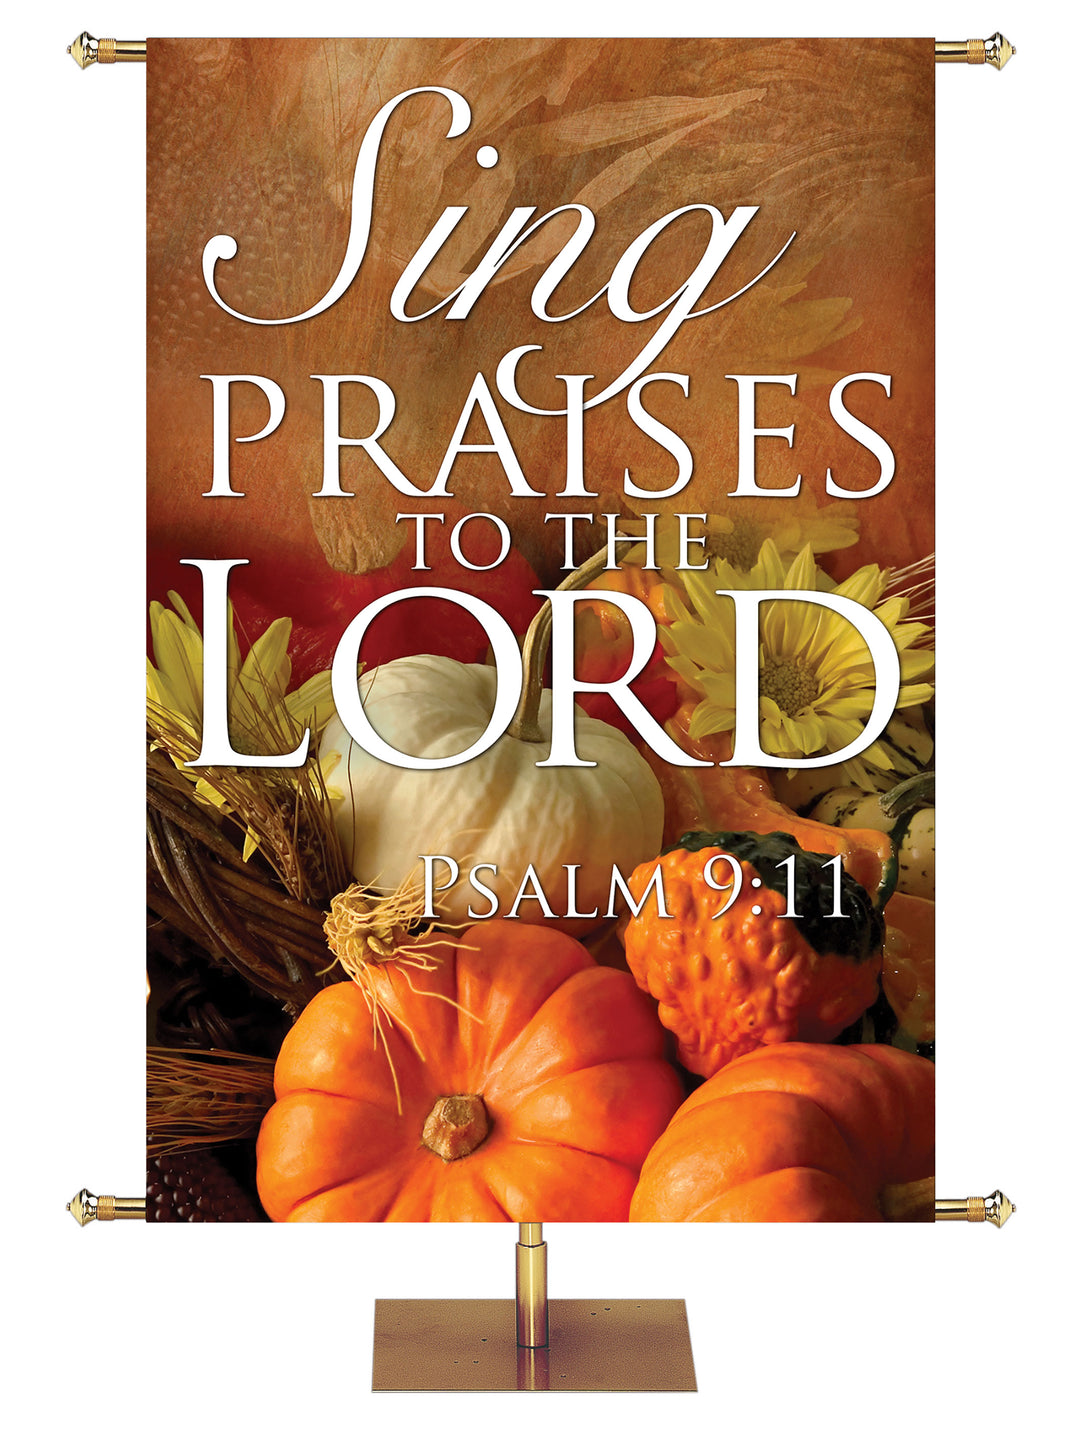 Sing Praises to the Lord Design 3 Psalm 9:11 Church Banner for Fall and Thanksgiving with pumpkins